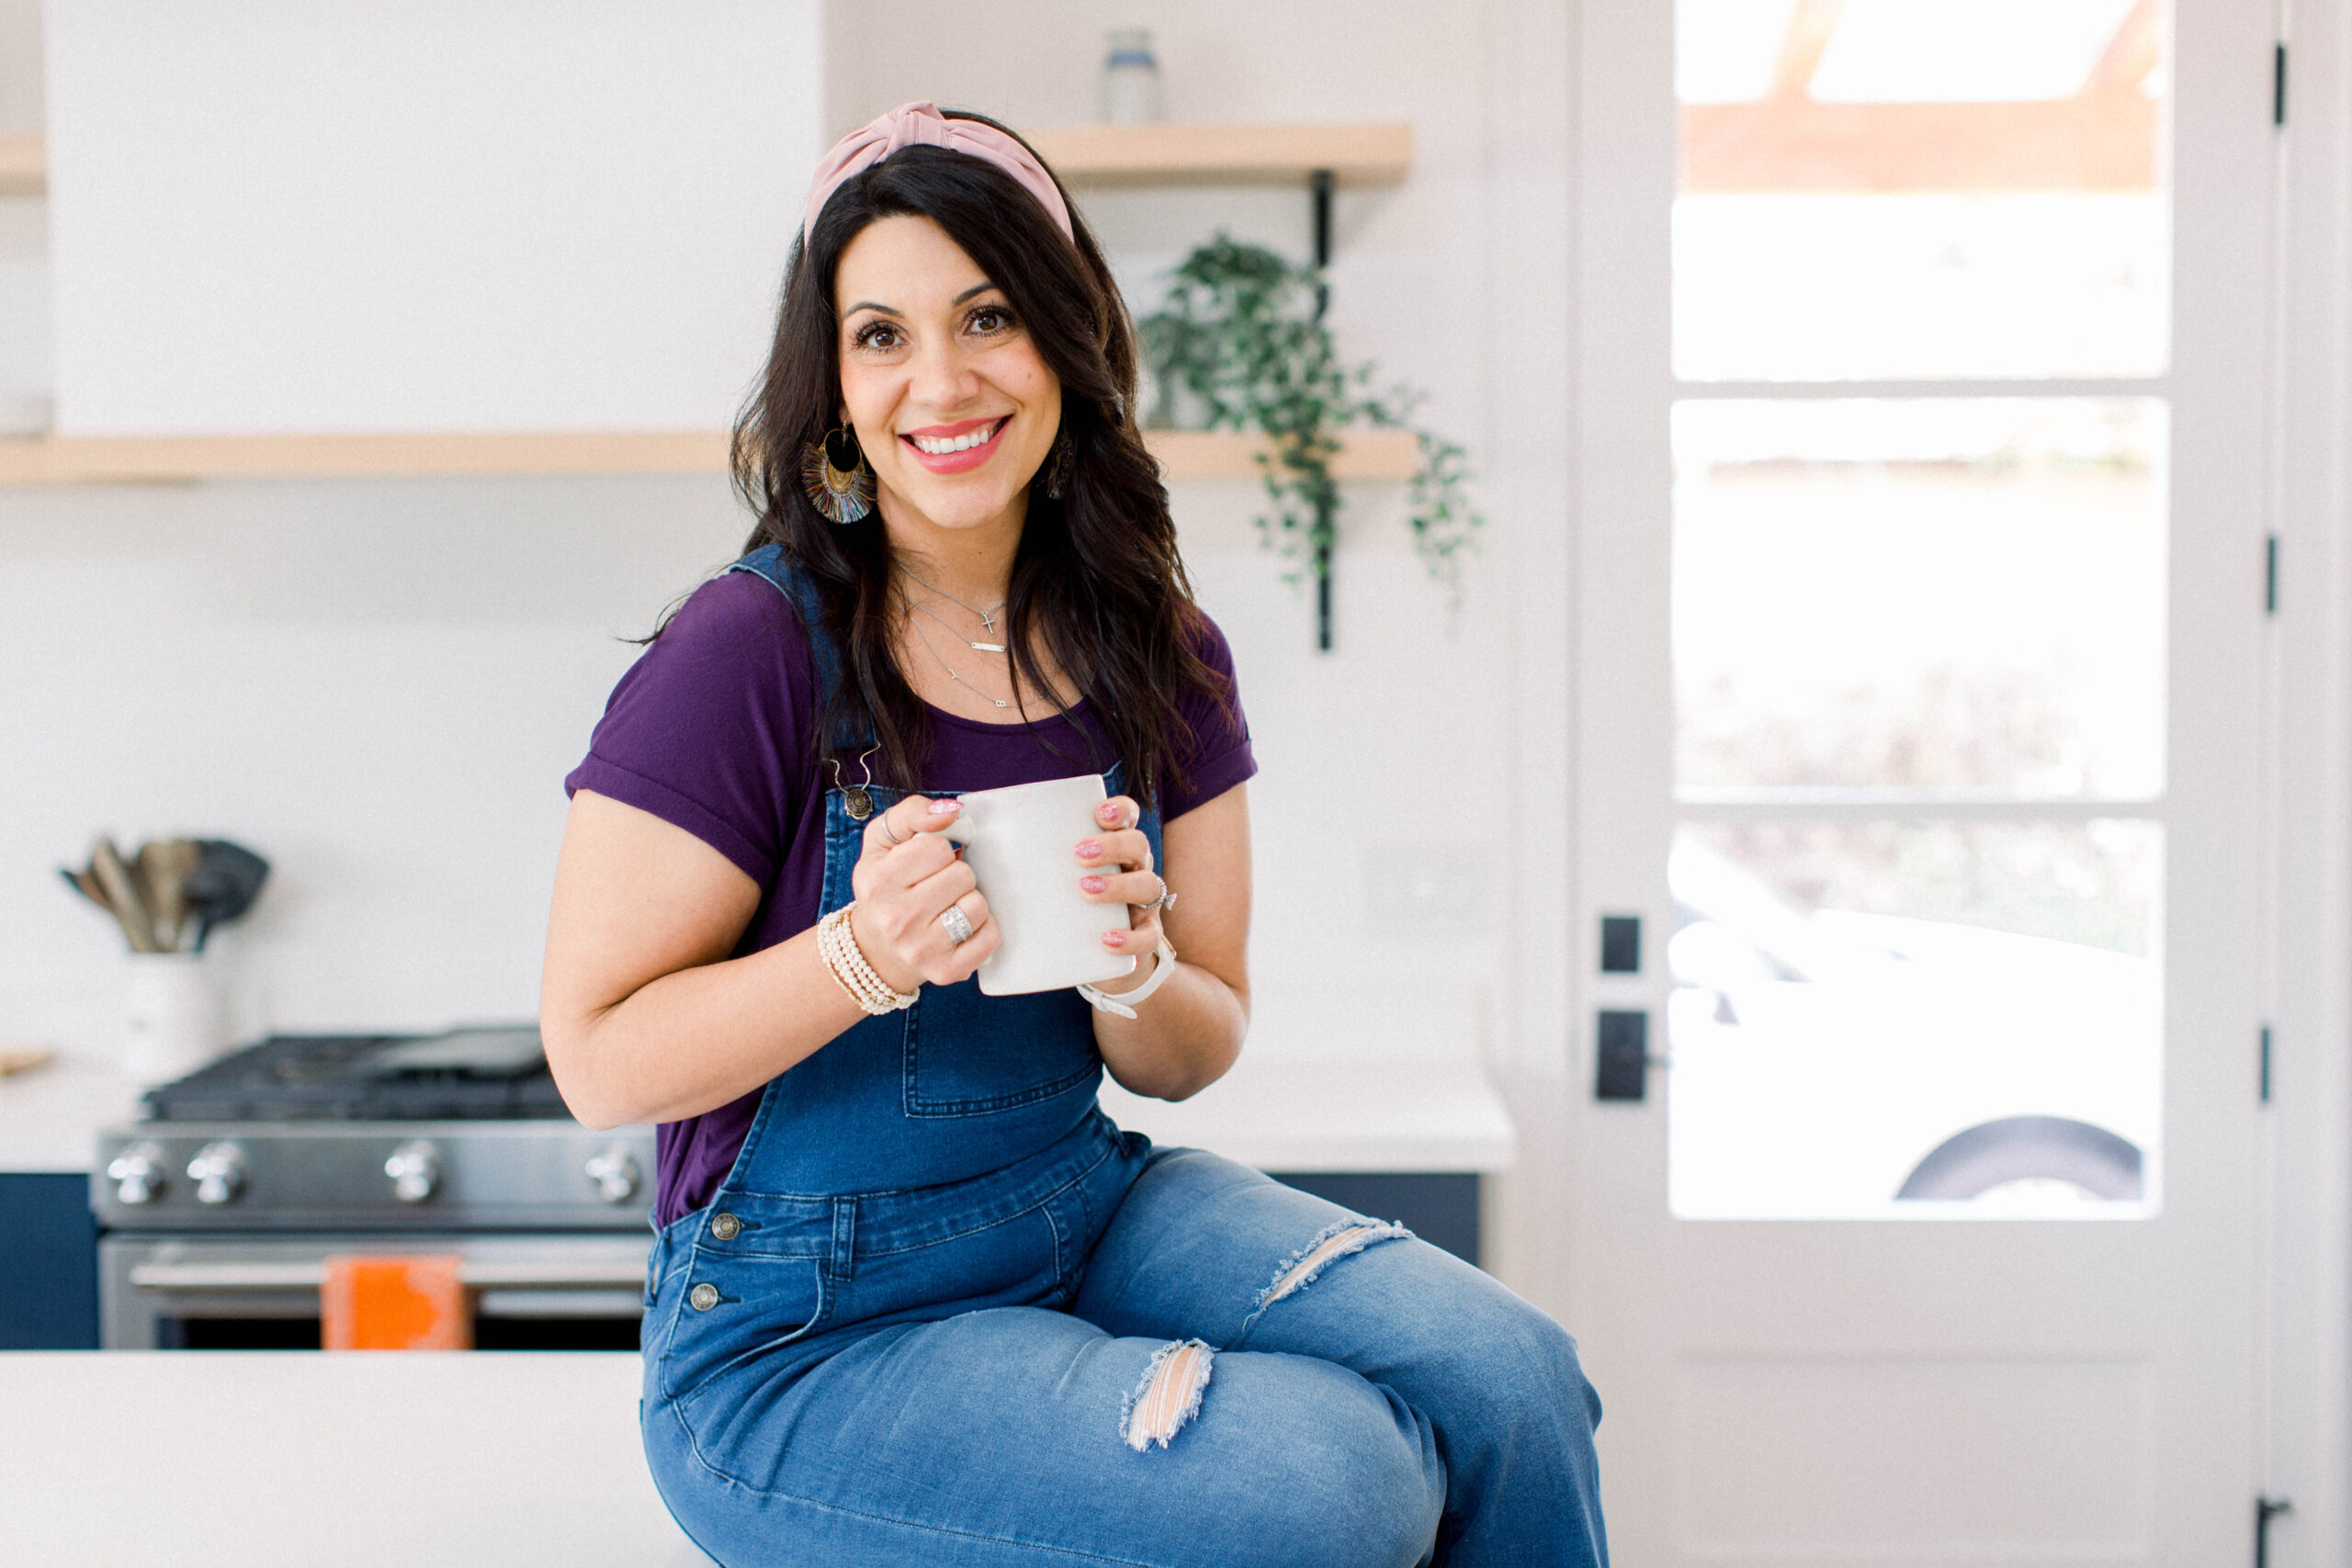 dark haired woman sitting on a kitchen counter. She is wearing denim overalls, a purple t-shirt, and a pink headband. She is smiling at the camera and holding a white mug.